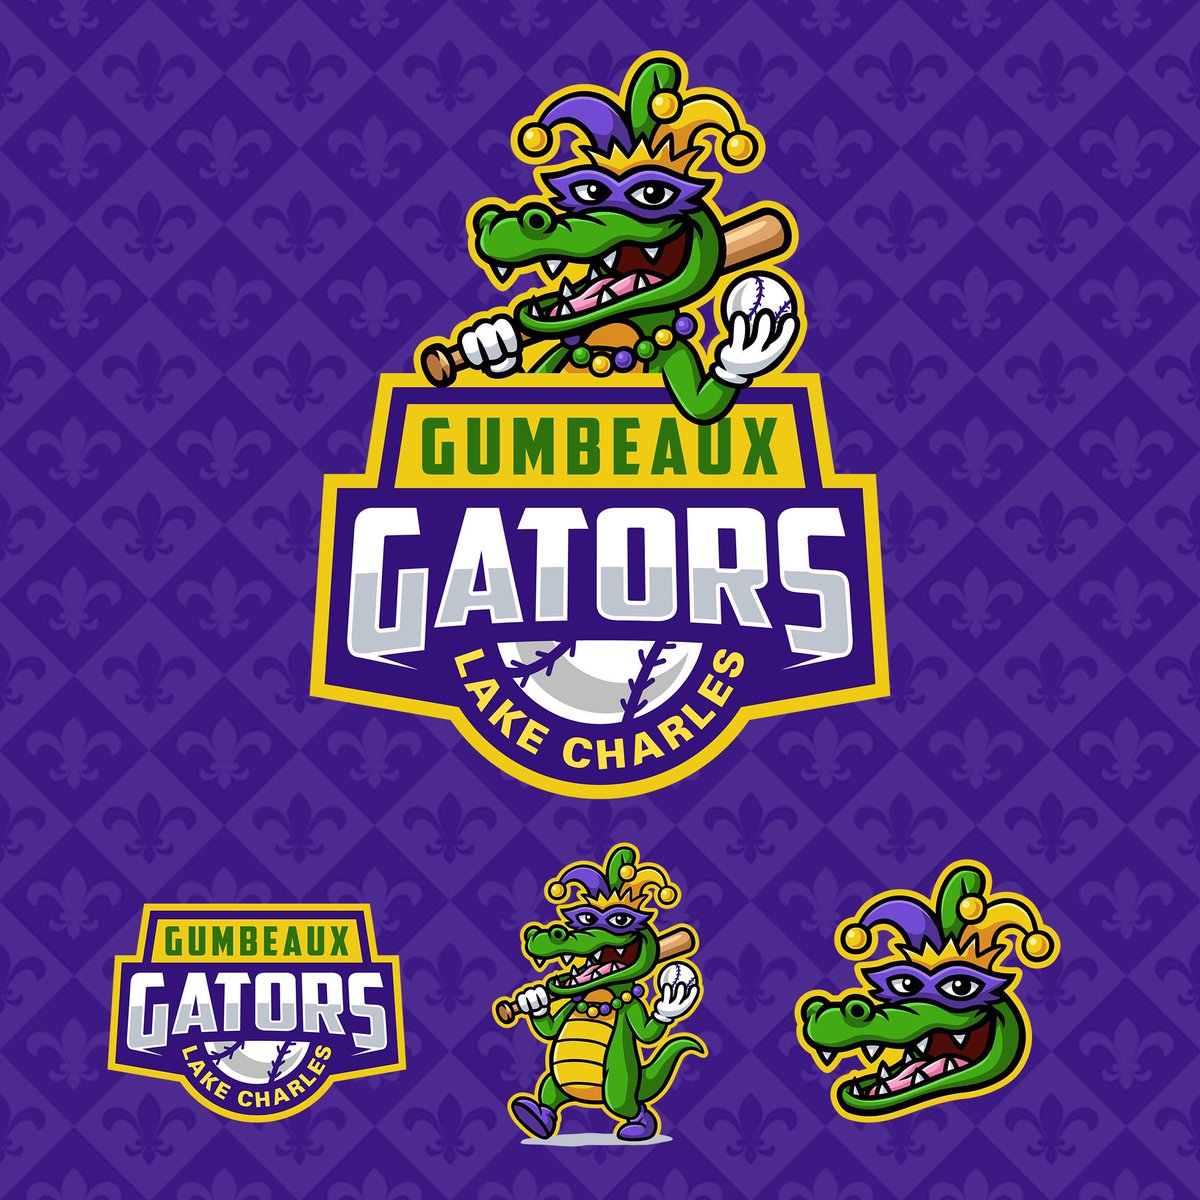 We’ve got a challenge for you. 👀 🚨 RETWEET this post and let’s share the Gumbeaux Gators brand to the whole baseball world! 🐊⚾️ We’re bringing Lake Charles a thrilling minor league baseball experience this summer. 🔥 #GeauxGators #GumbeauxGators